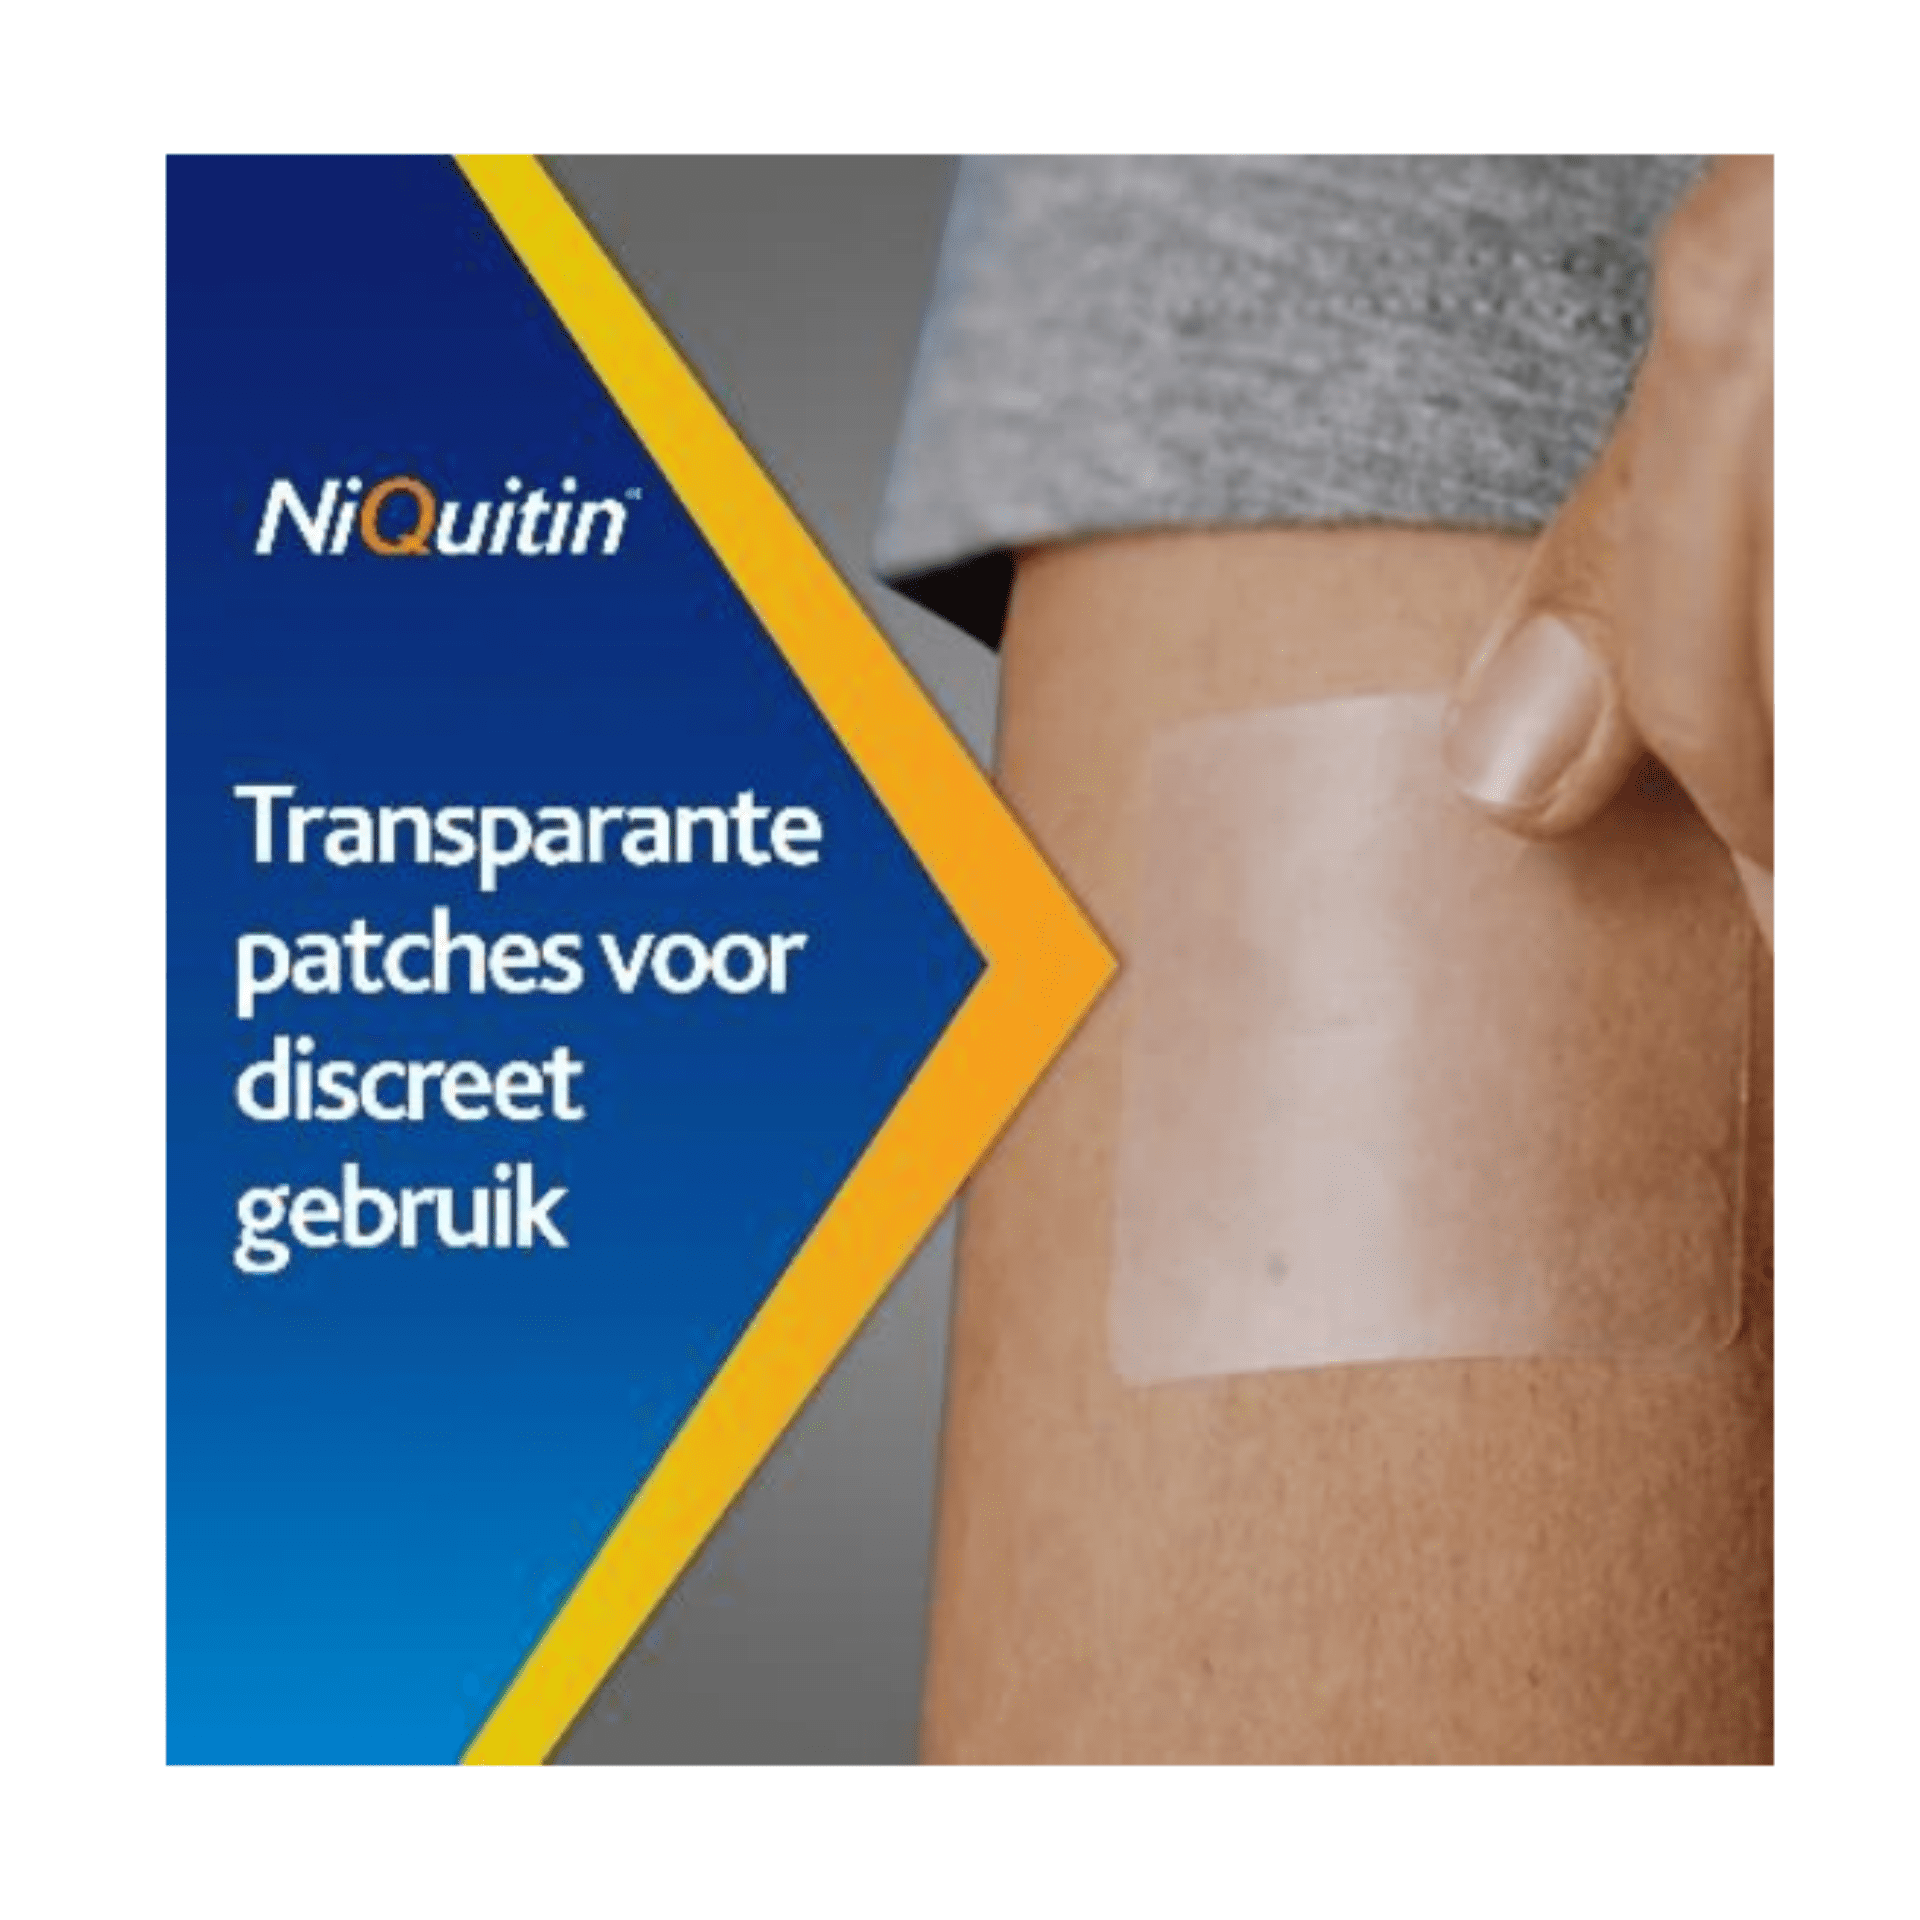 NiQuitin Clear Patches 21 mg